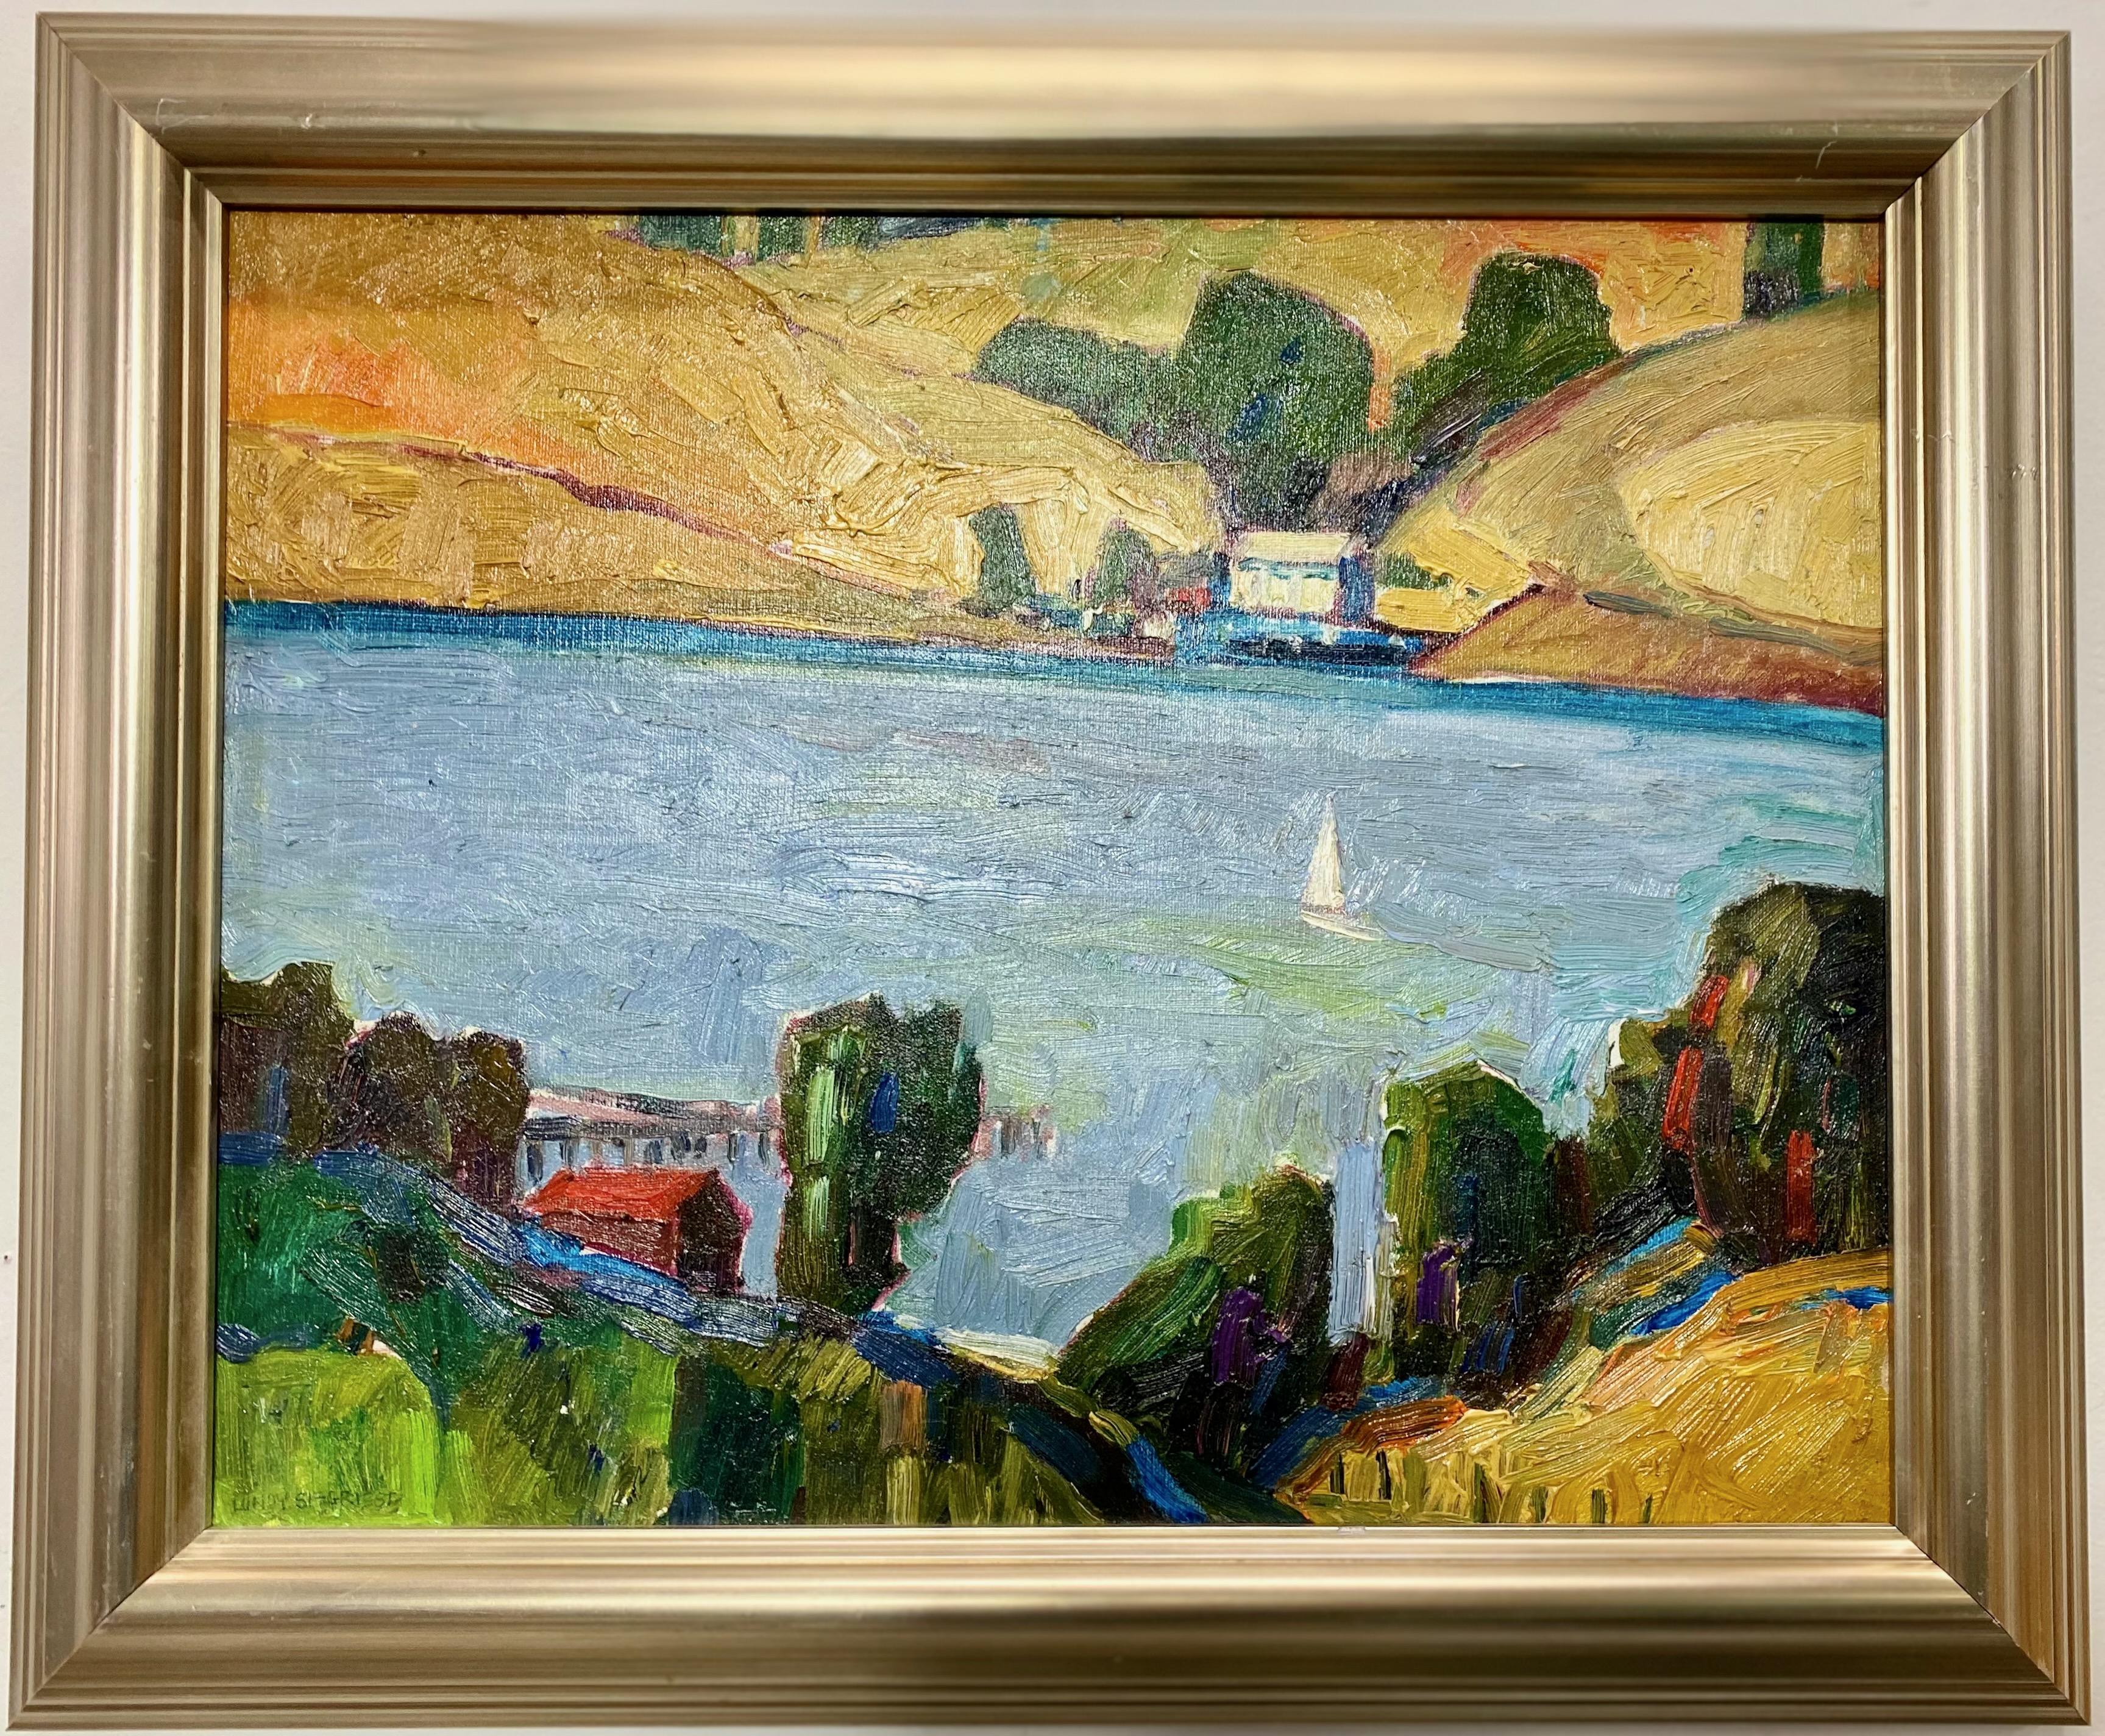 Hand-Painted San Francisco Bay Area Coastal Landscape Painting by Lundy Siegriest, 1977